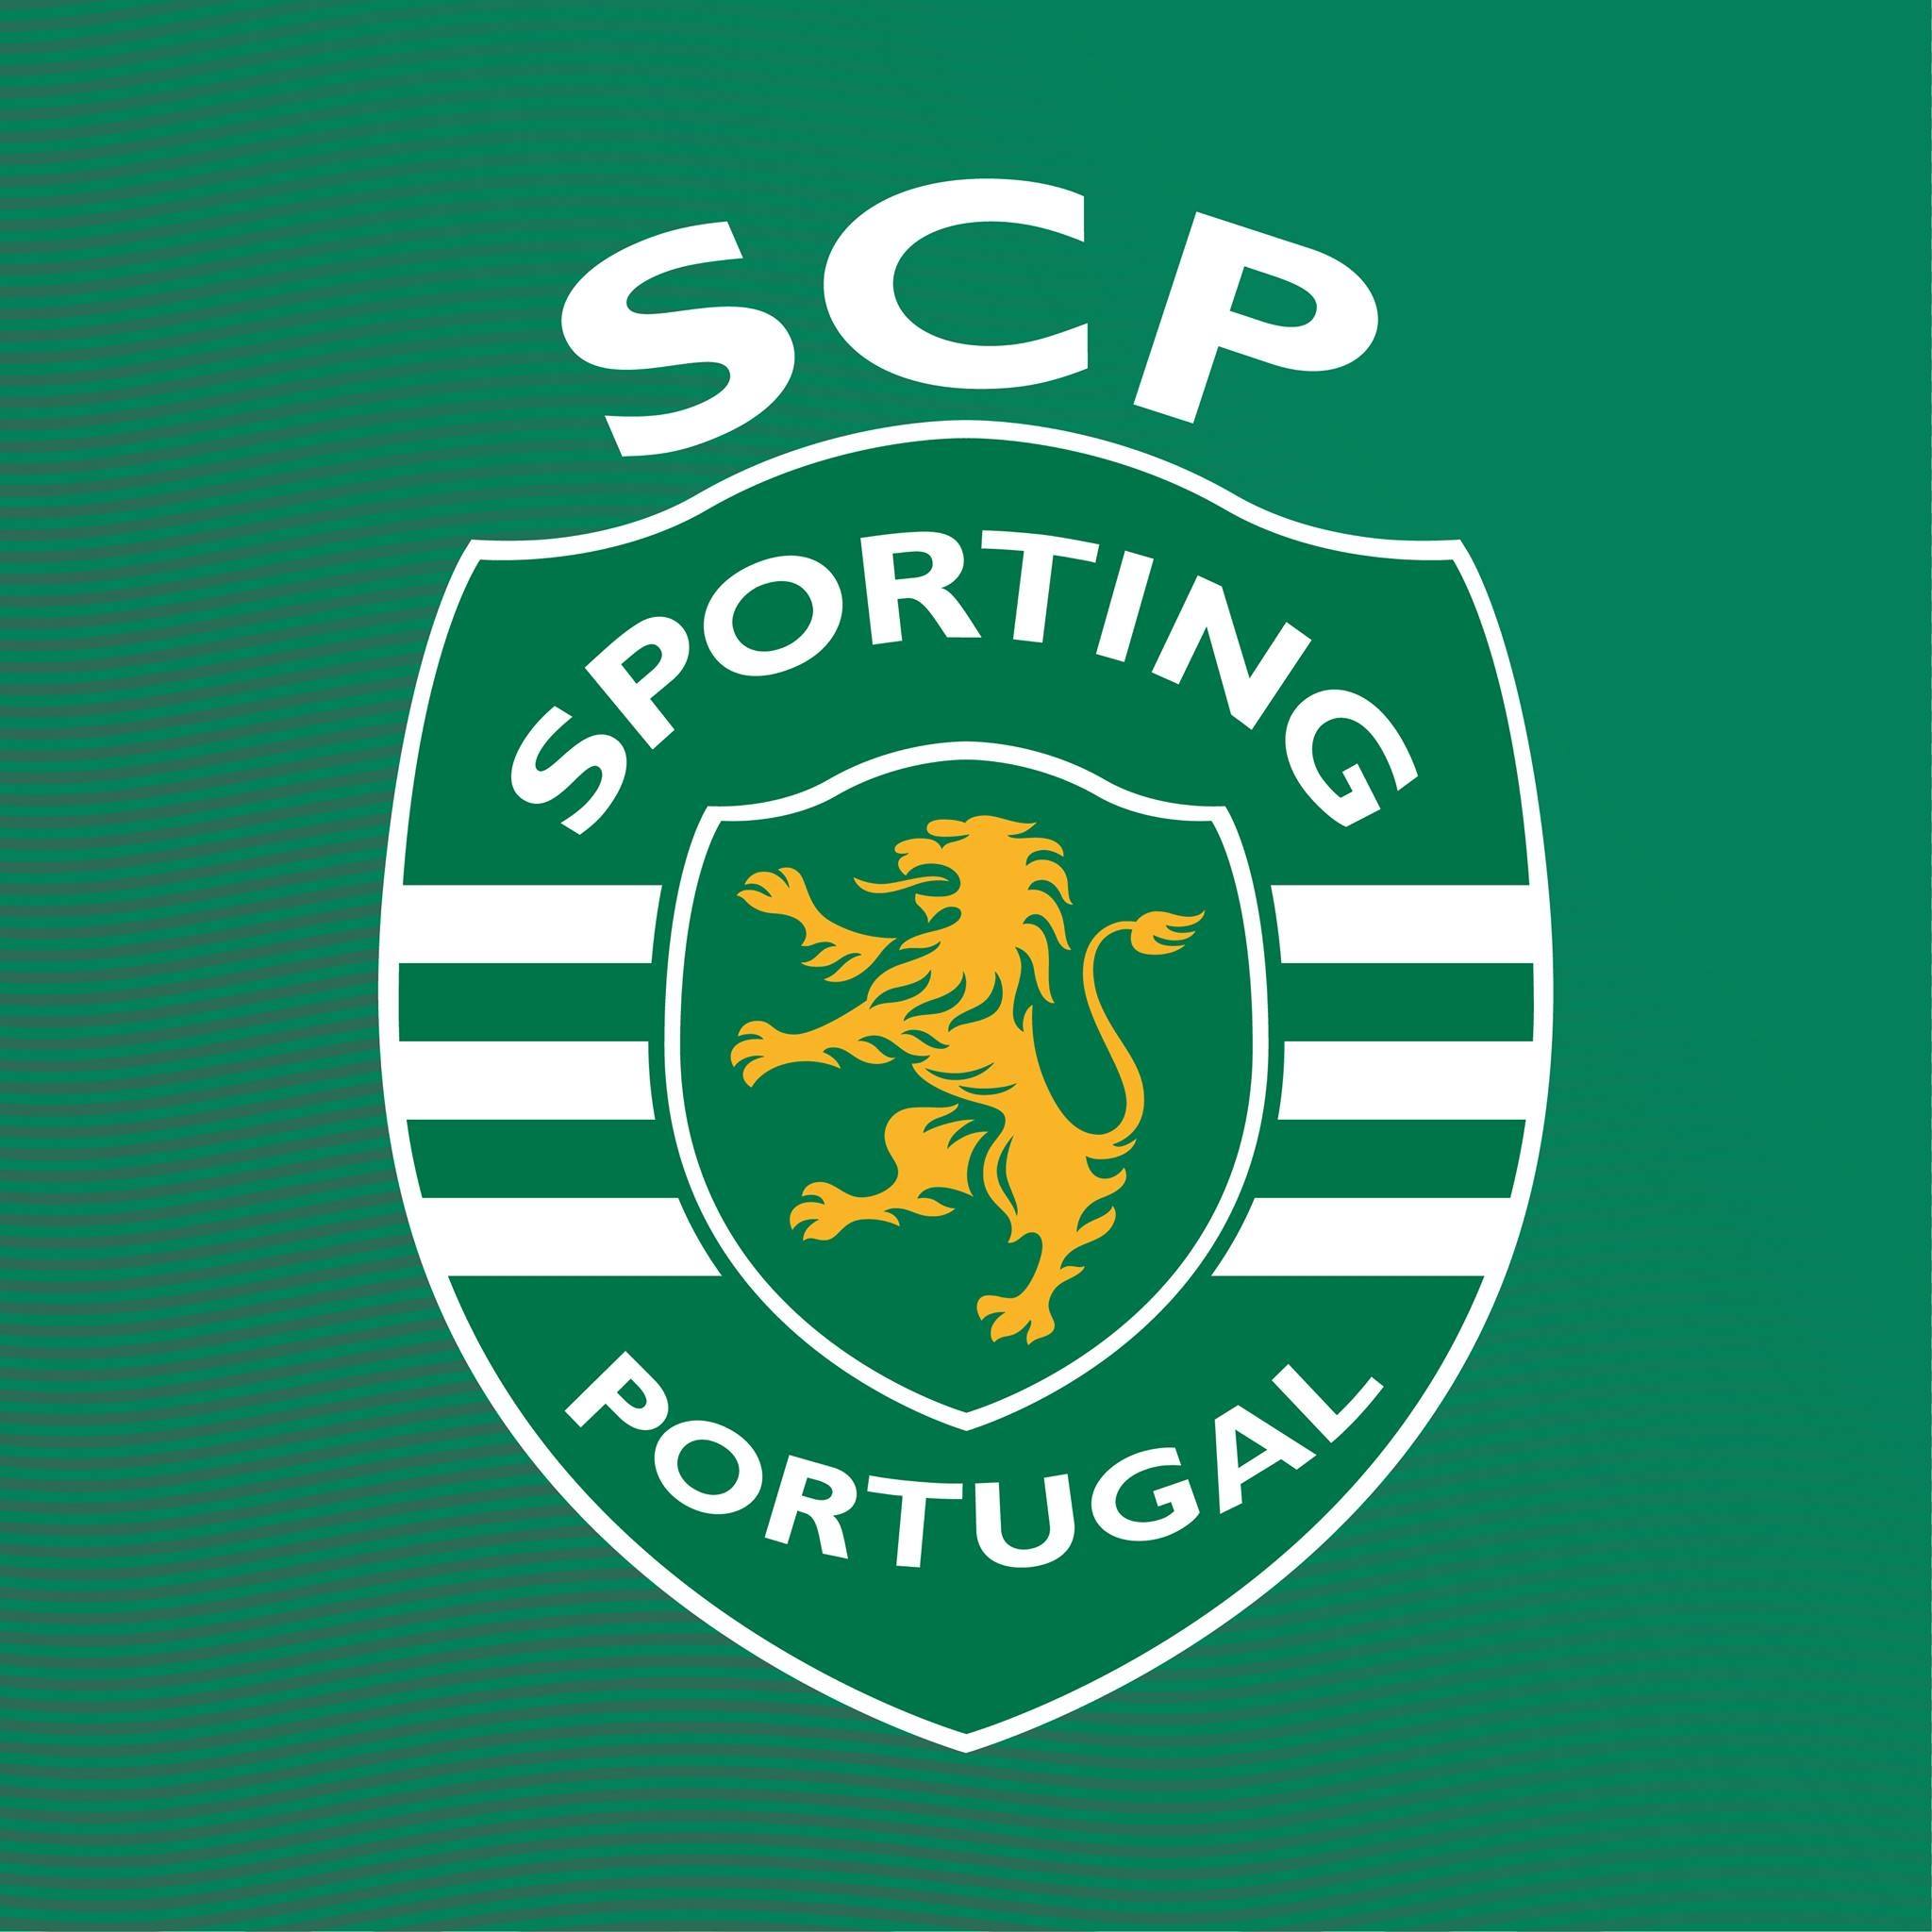 Sporting CP GIFs & Share on GIPHY